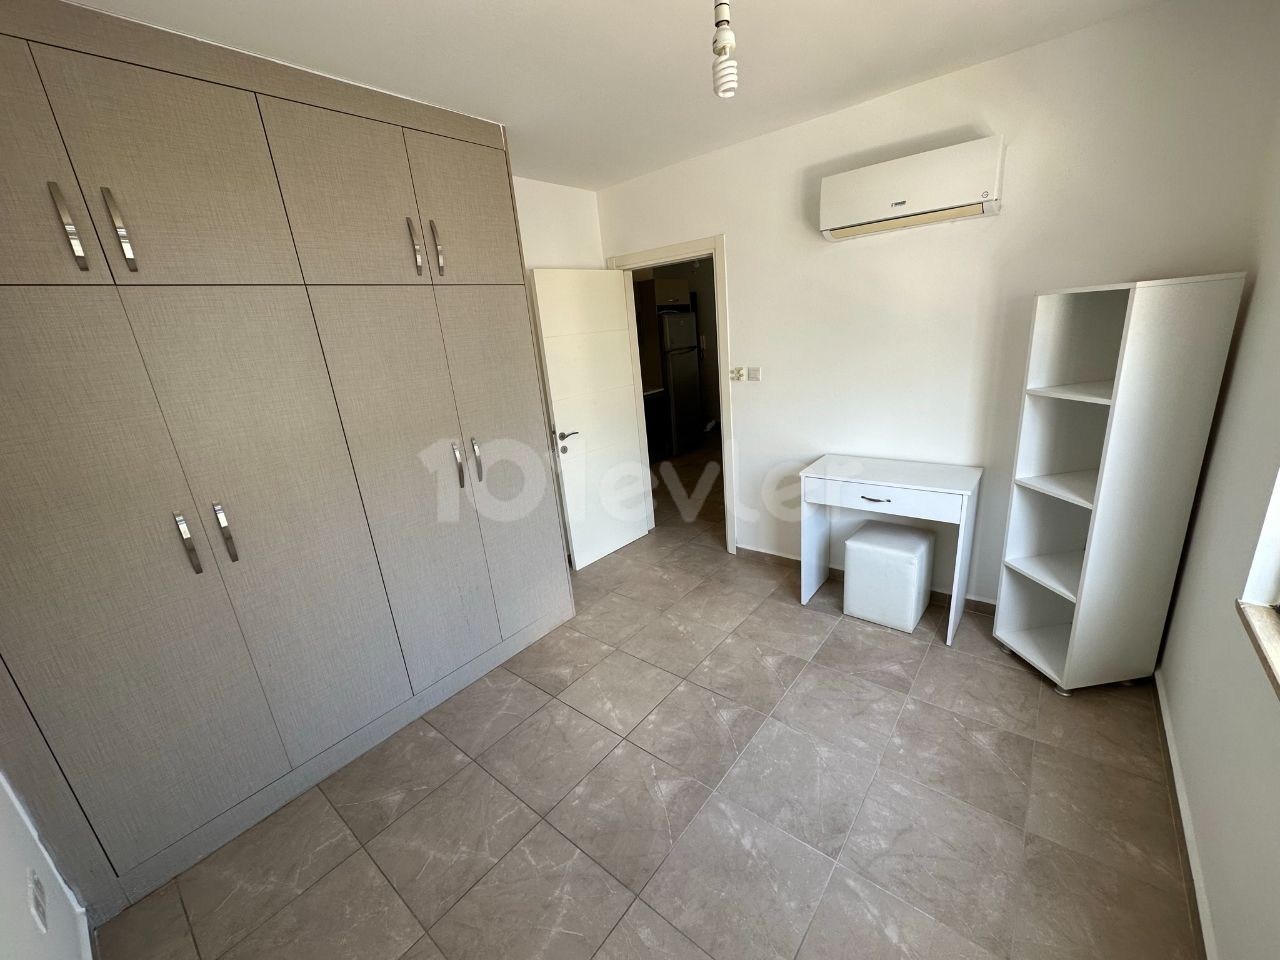 LUXURY FURNISHED NEW 1+1 APARTMENT ON THE MAIN STREET IN THE CENTER OF GUINEA